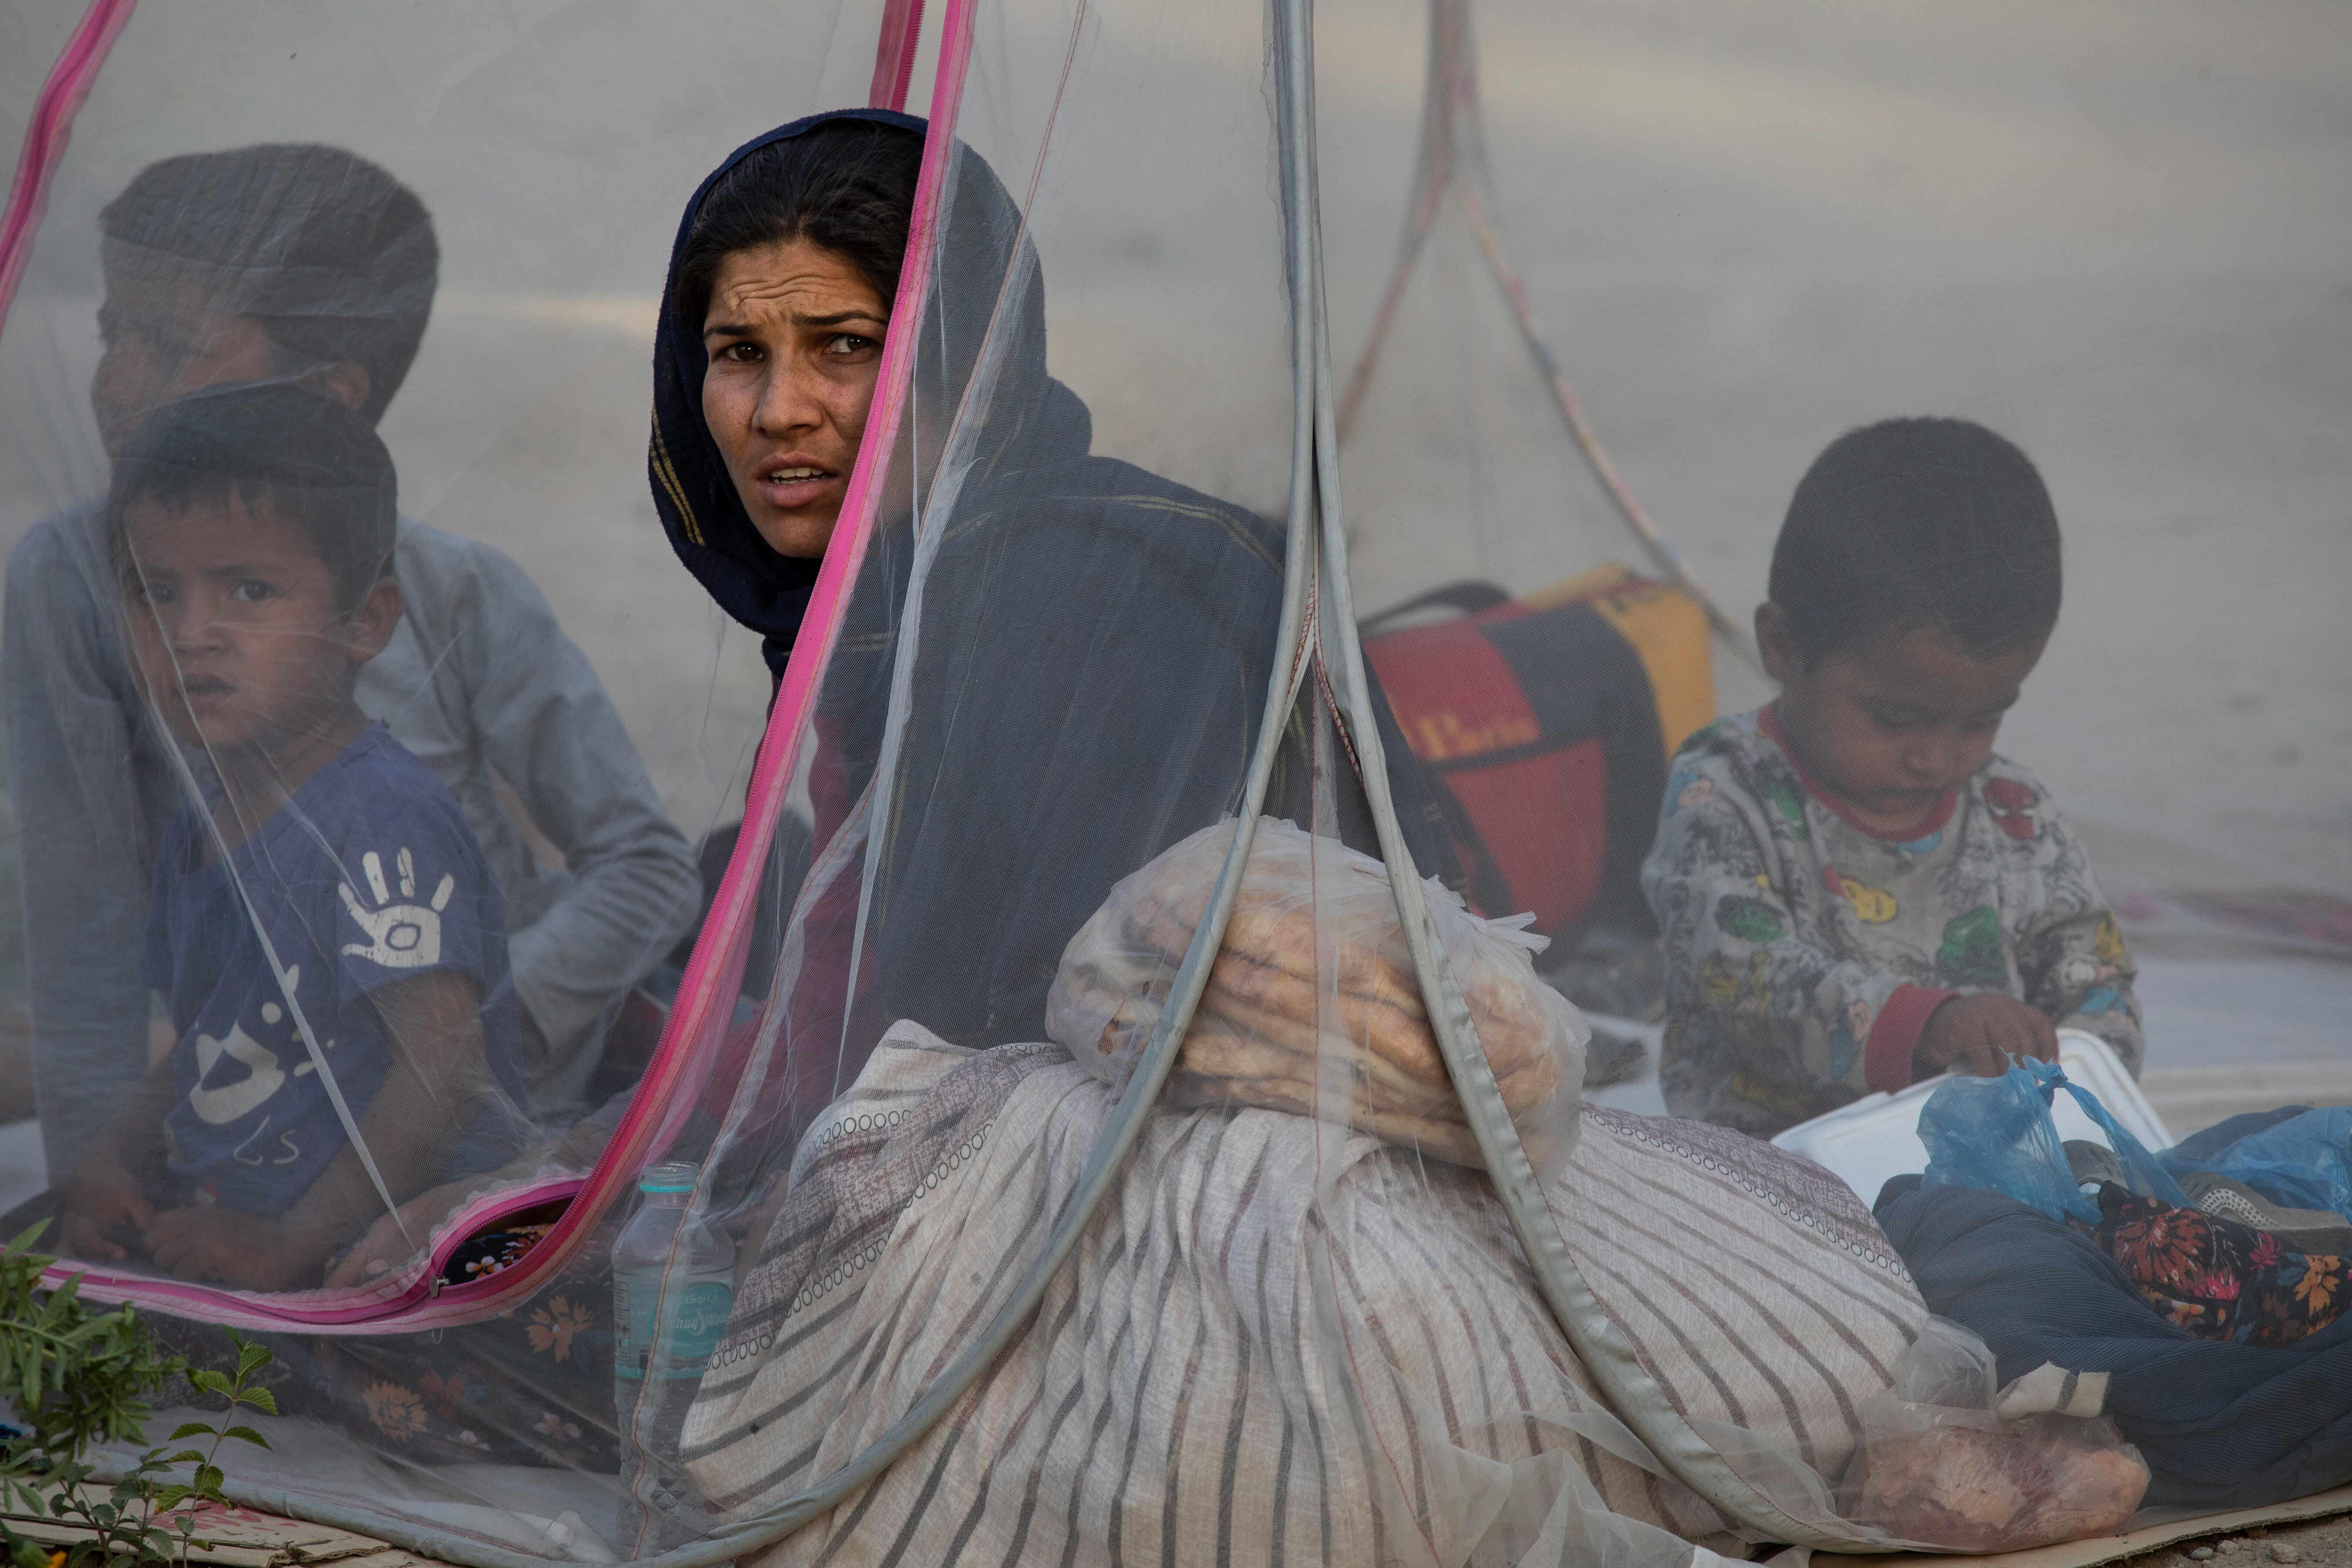 A woman sat in a tent with young children.